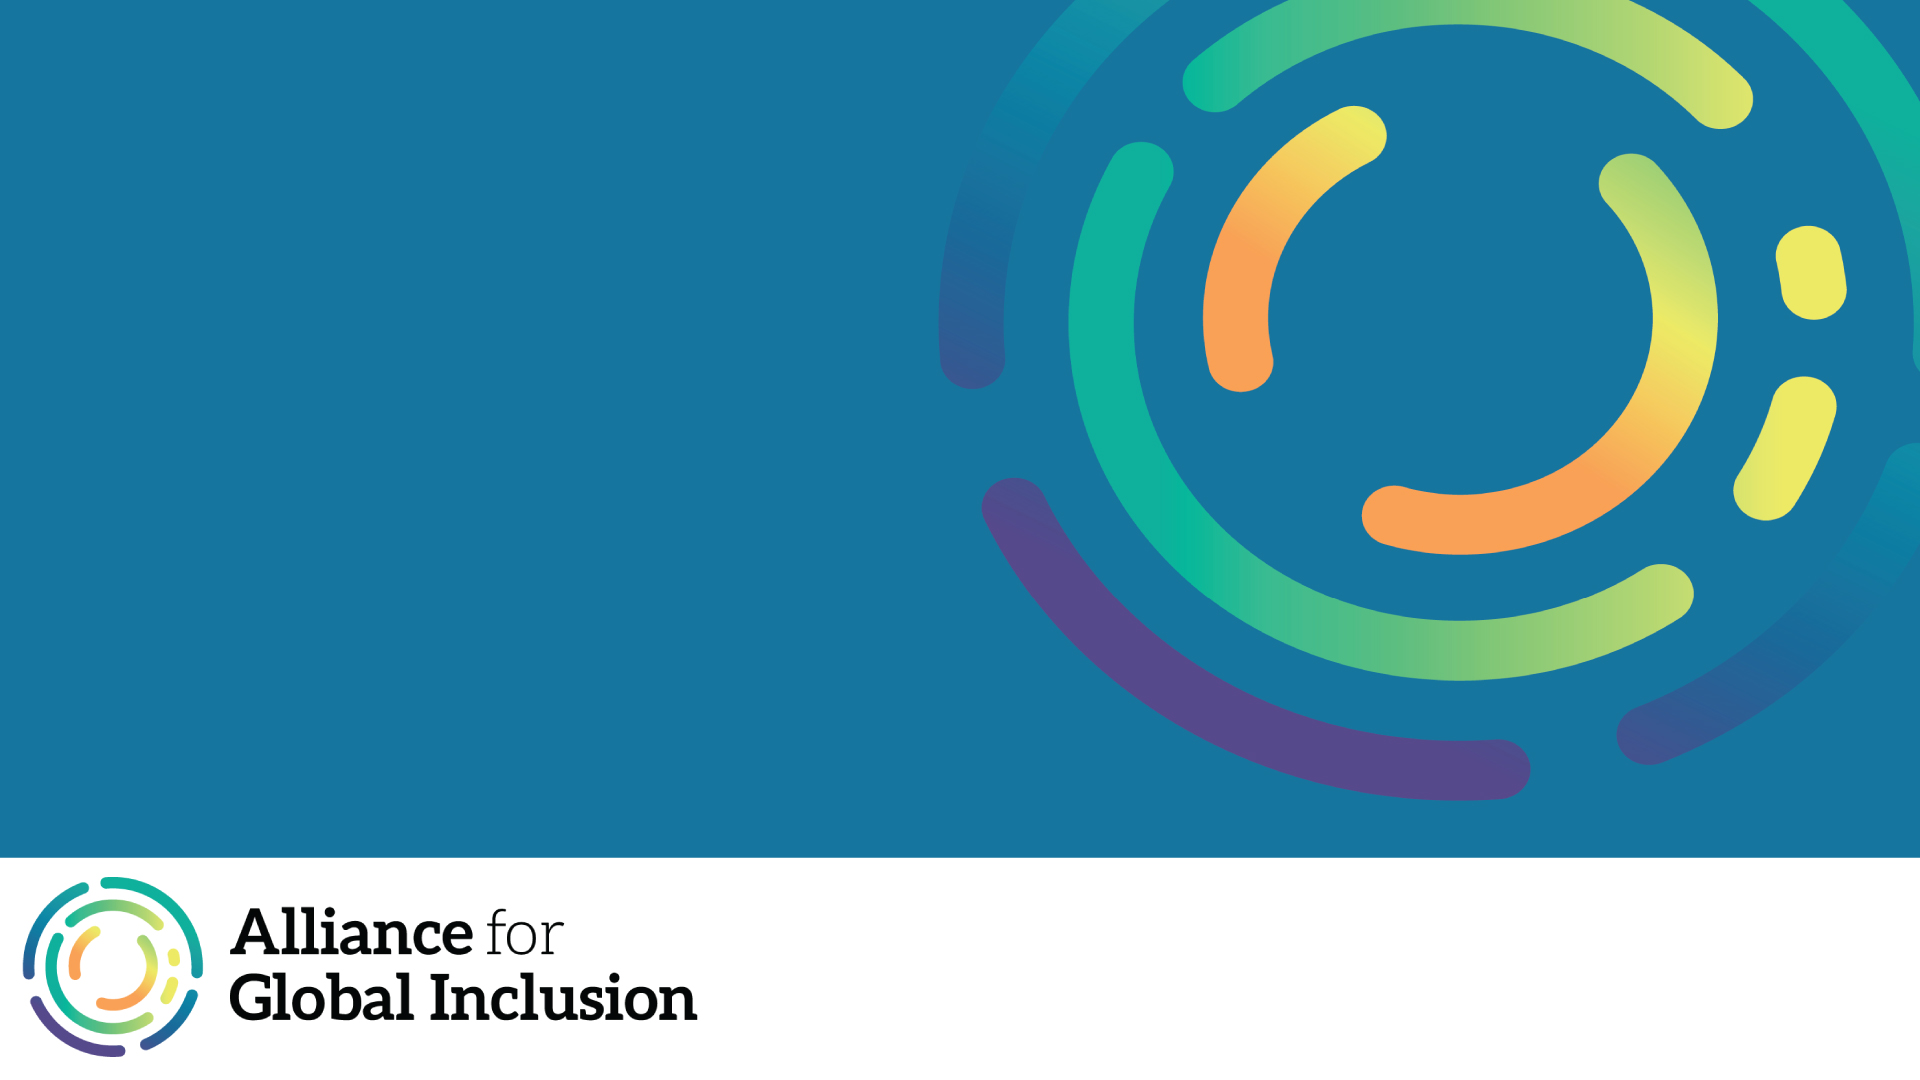 A teal background with the Alliance for Global Inclusion pictorial mark in the upper right corner, across the bottom is a white bar with the Alliance pictorial mark and the words "Alliance for Global Inclusion" on the left side.